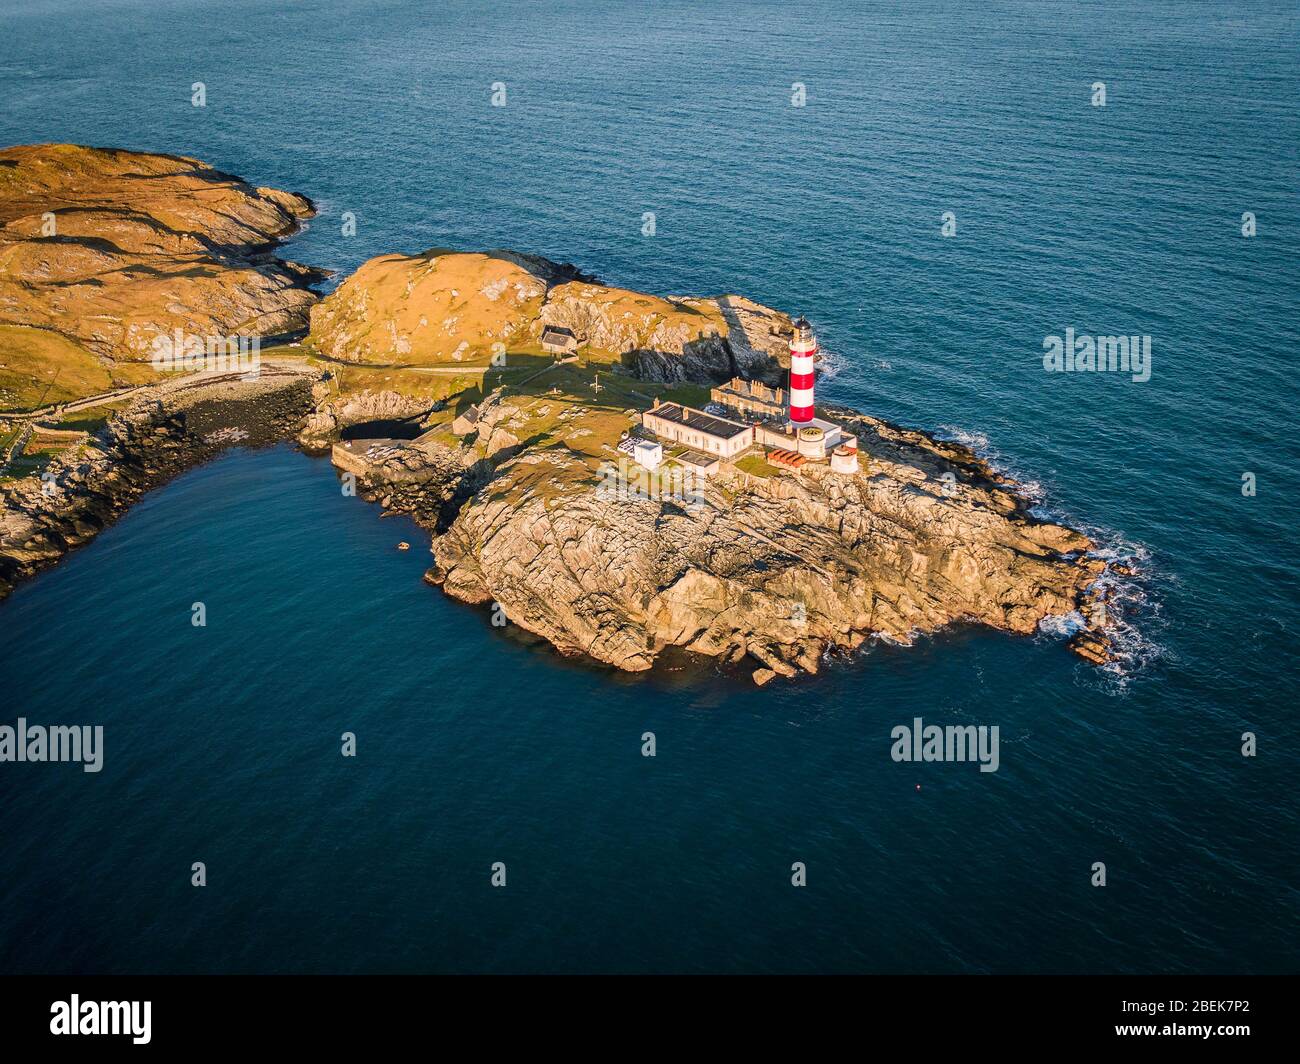 An Aerial photograph overlooking Eilean Glas Lighthouse on the Isle of  Scaplay, Outer Hebridies, Scotland Stock Photo - Alamy